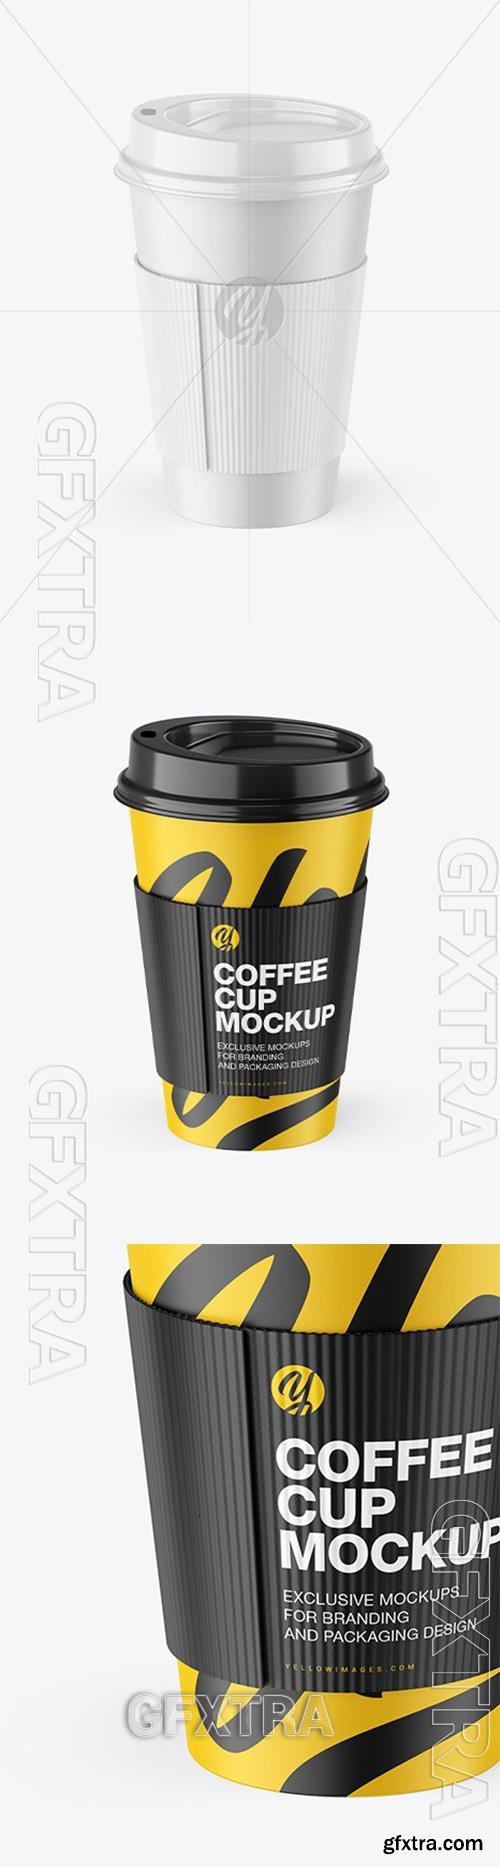 Matte Coffee Cup With Holder Mockup 94333